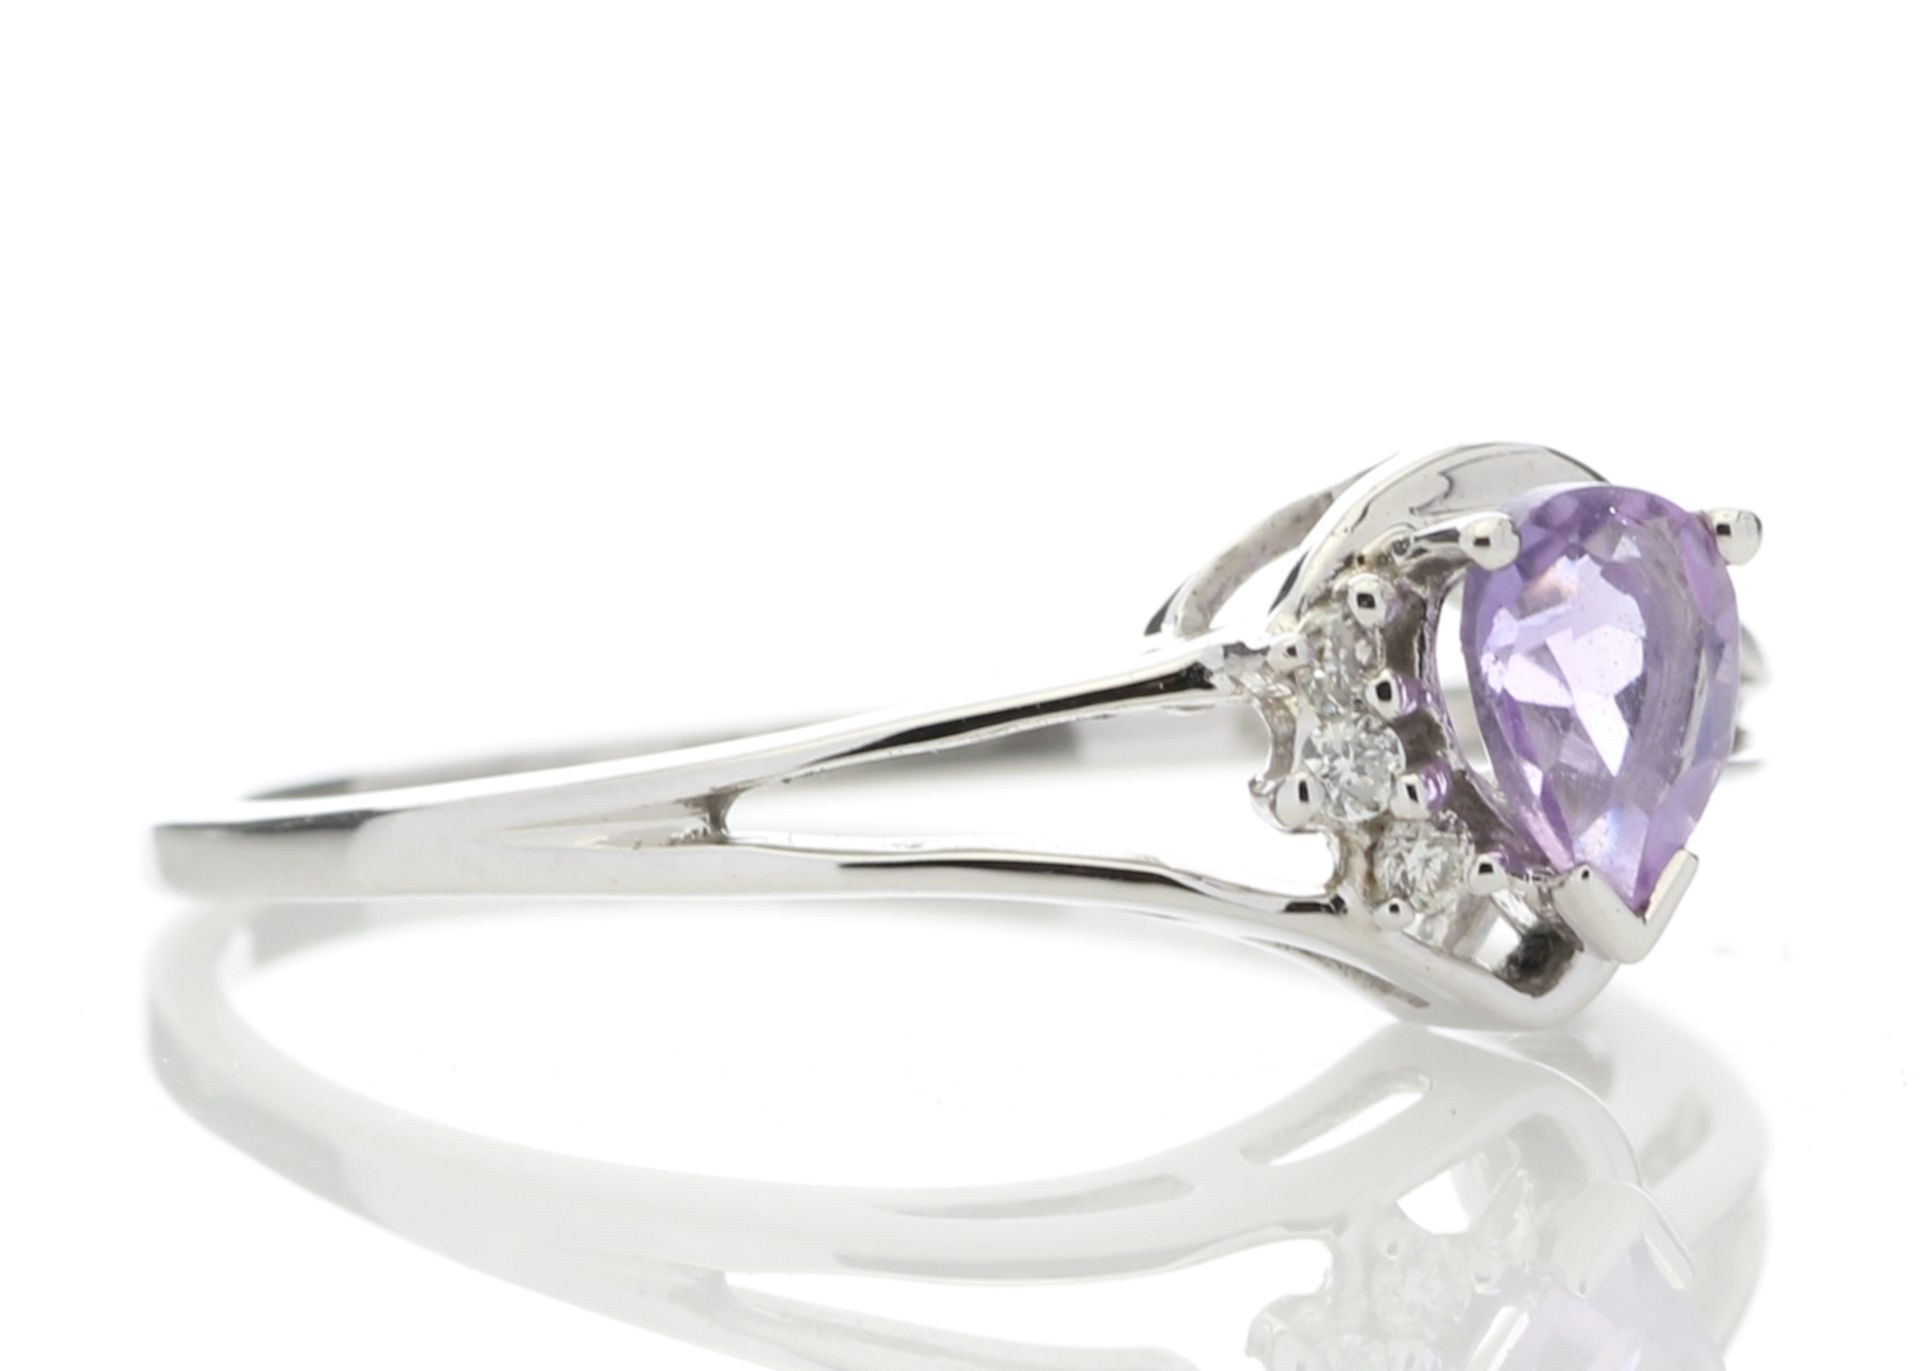 9ct White Gold Amethyst Pear Shaped Diamond Ring (A0.42) 0.03 Carats - Image 4 of 5